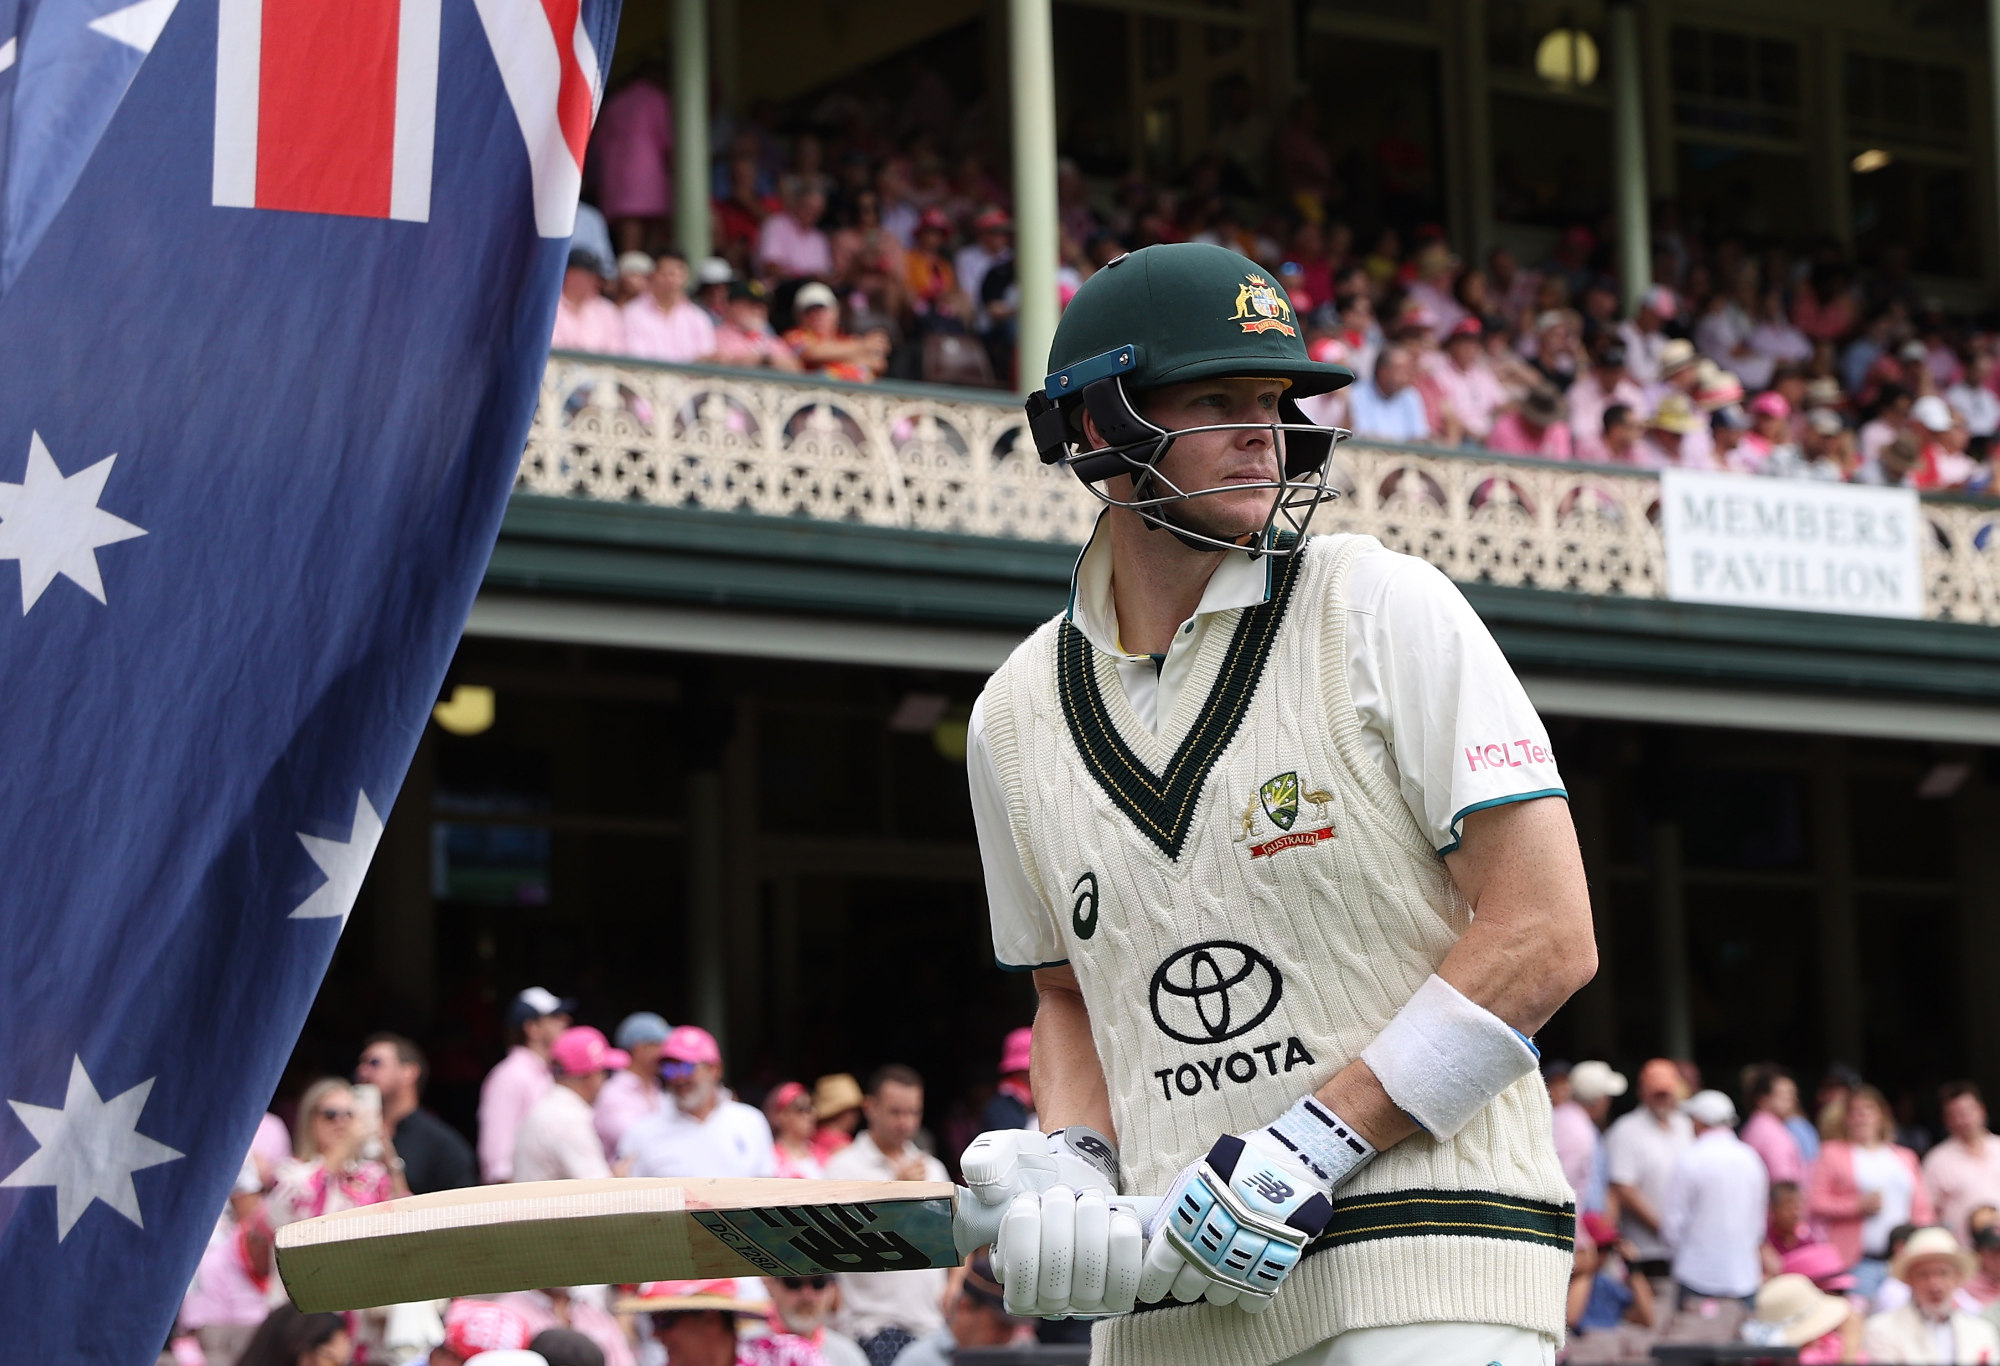 Steve Smith of Australia makes his way out to bat at Sydney Cricket Ground